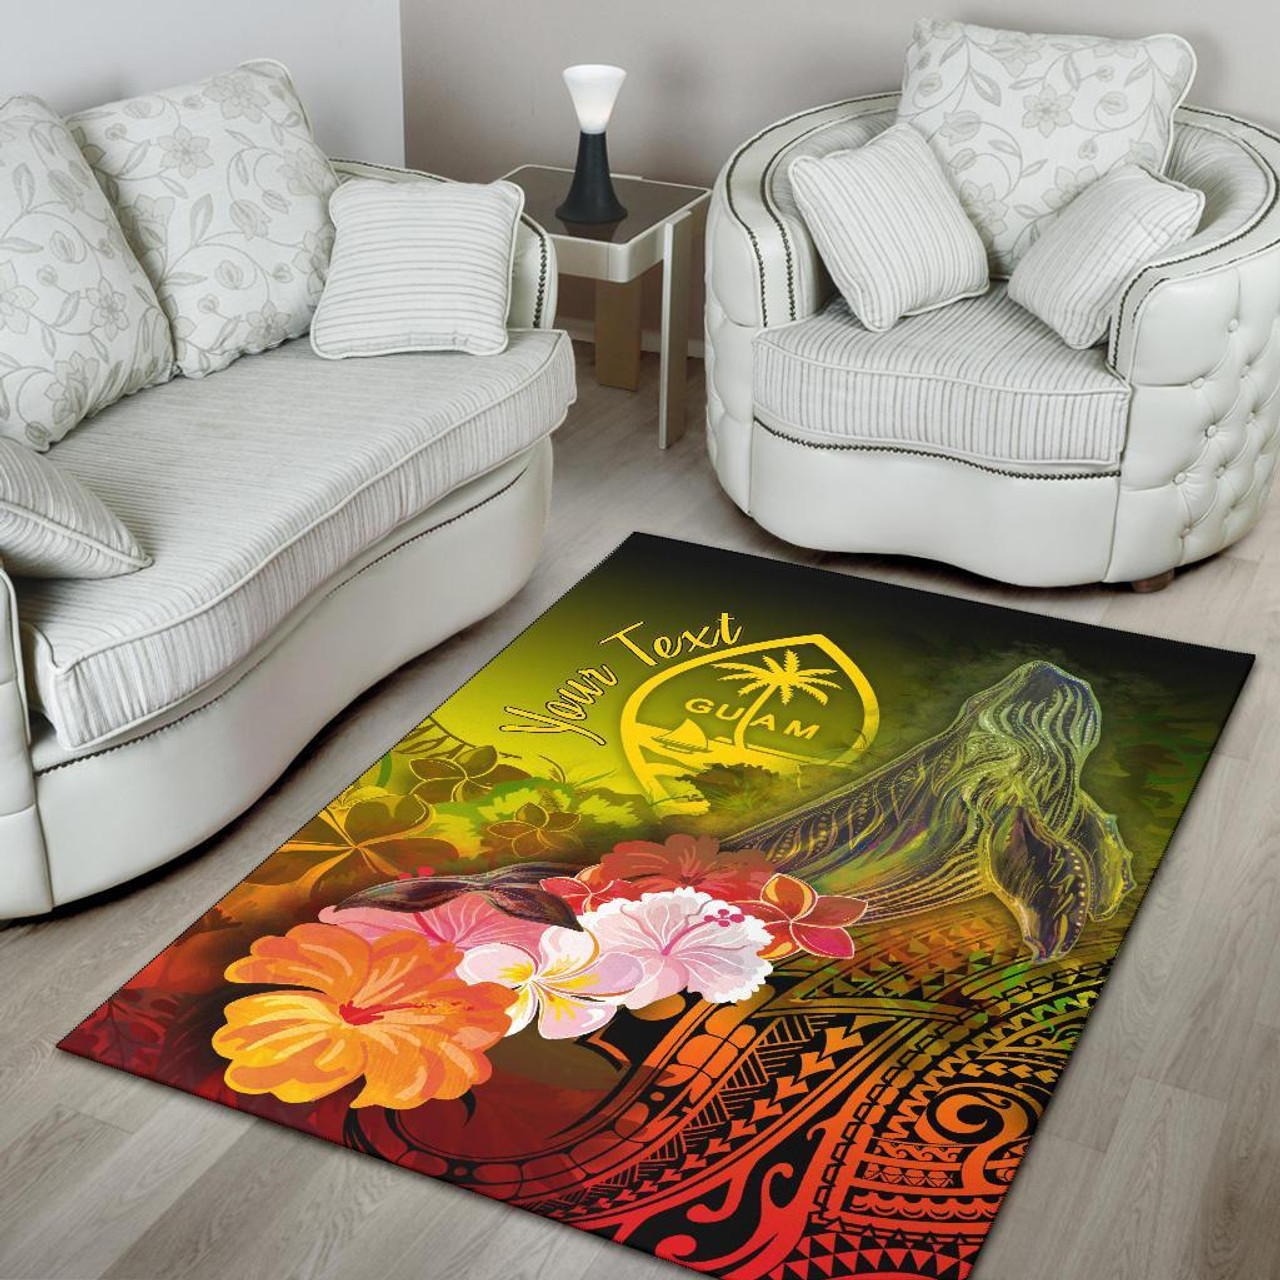 Guam Custom Personalised Area Rug - Humpback Whale with Tropical Flowers (Yellow) Polynesian 4